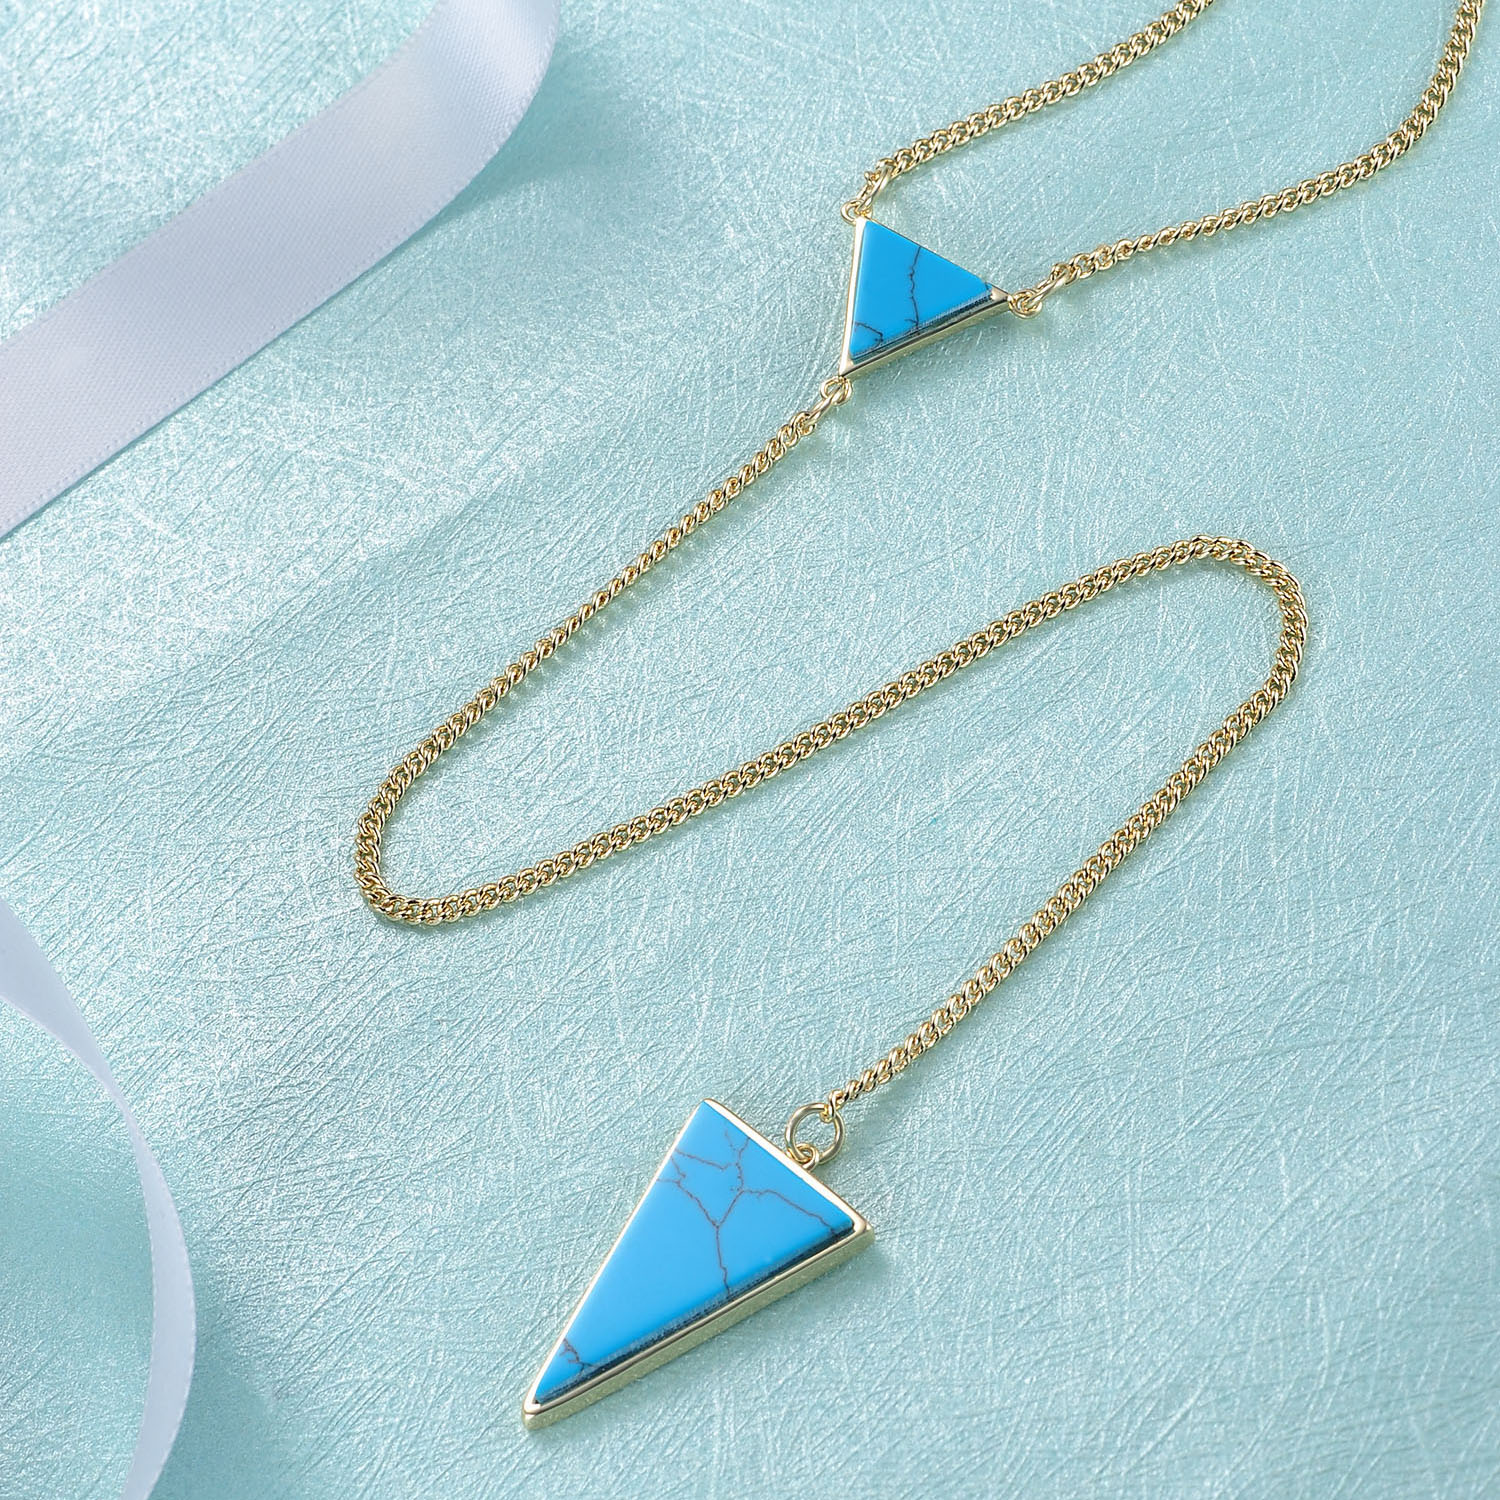 Fashion Costume Unique Hawaii 14k Gold Plated Triangle Earrings Necklace Women Turquoise Jewelry Set(图2)